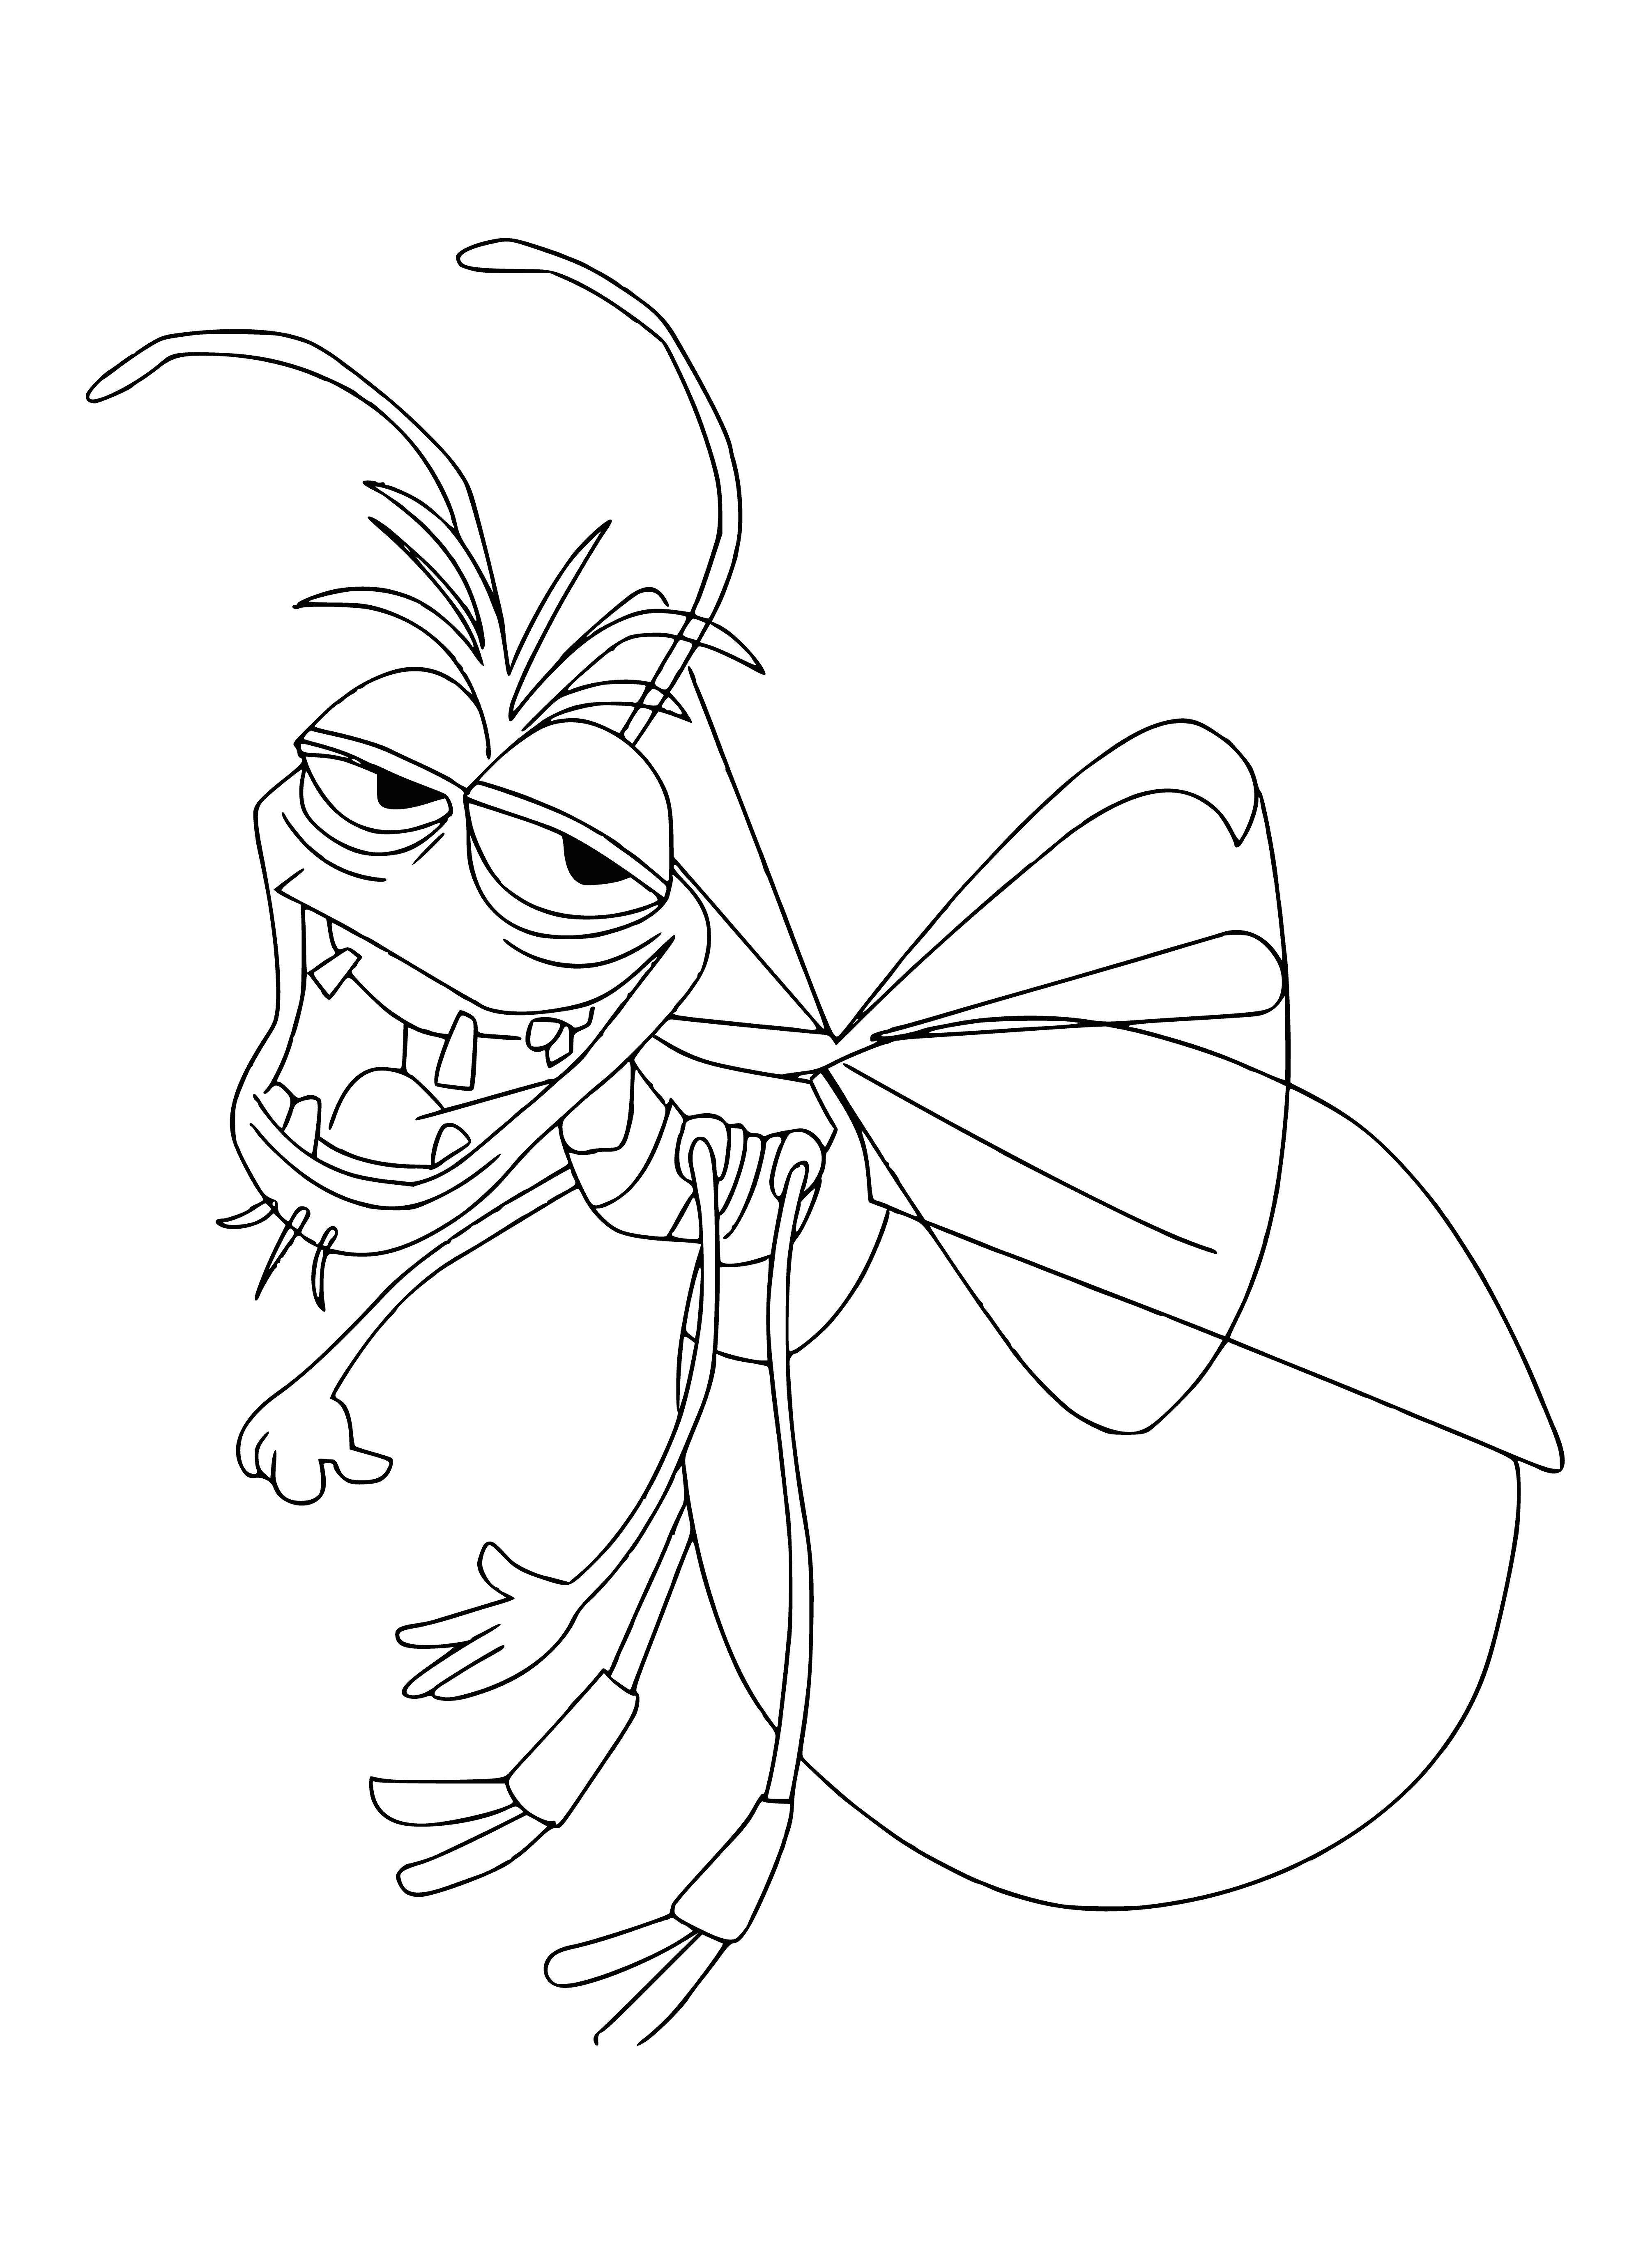 Firefly Ray coloring page